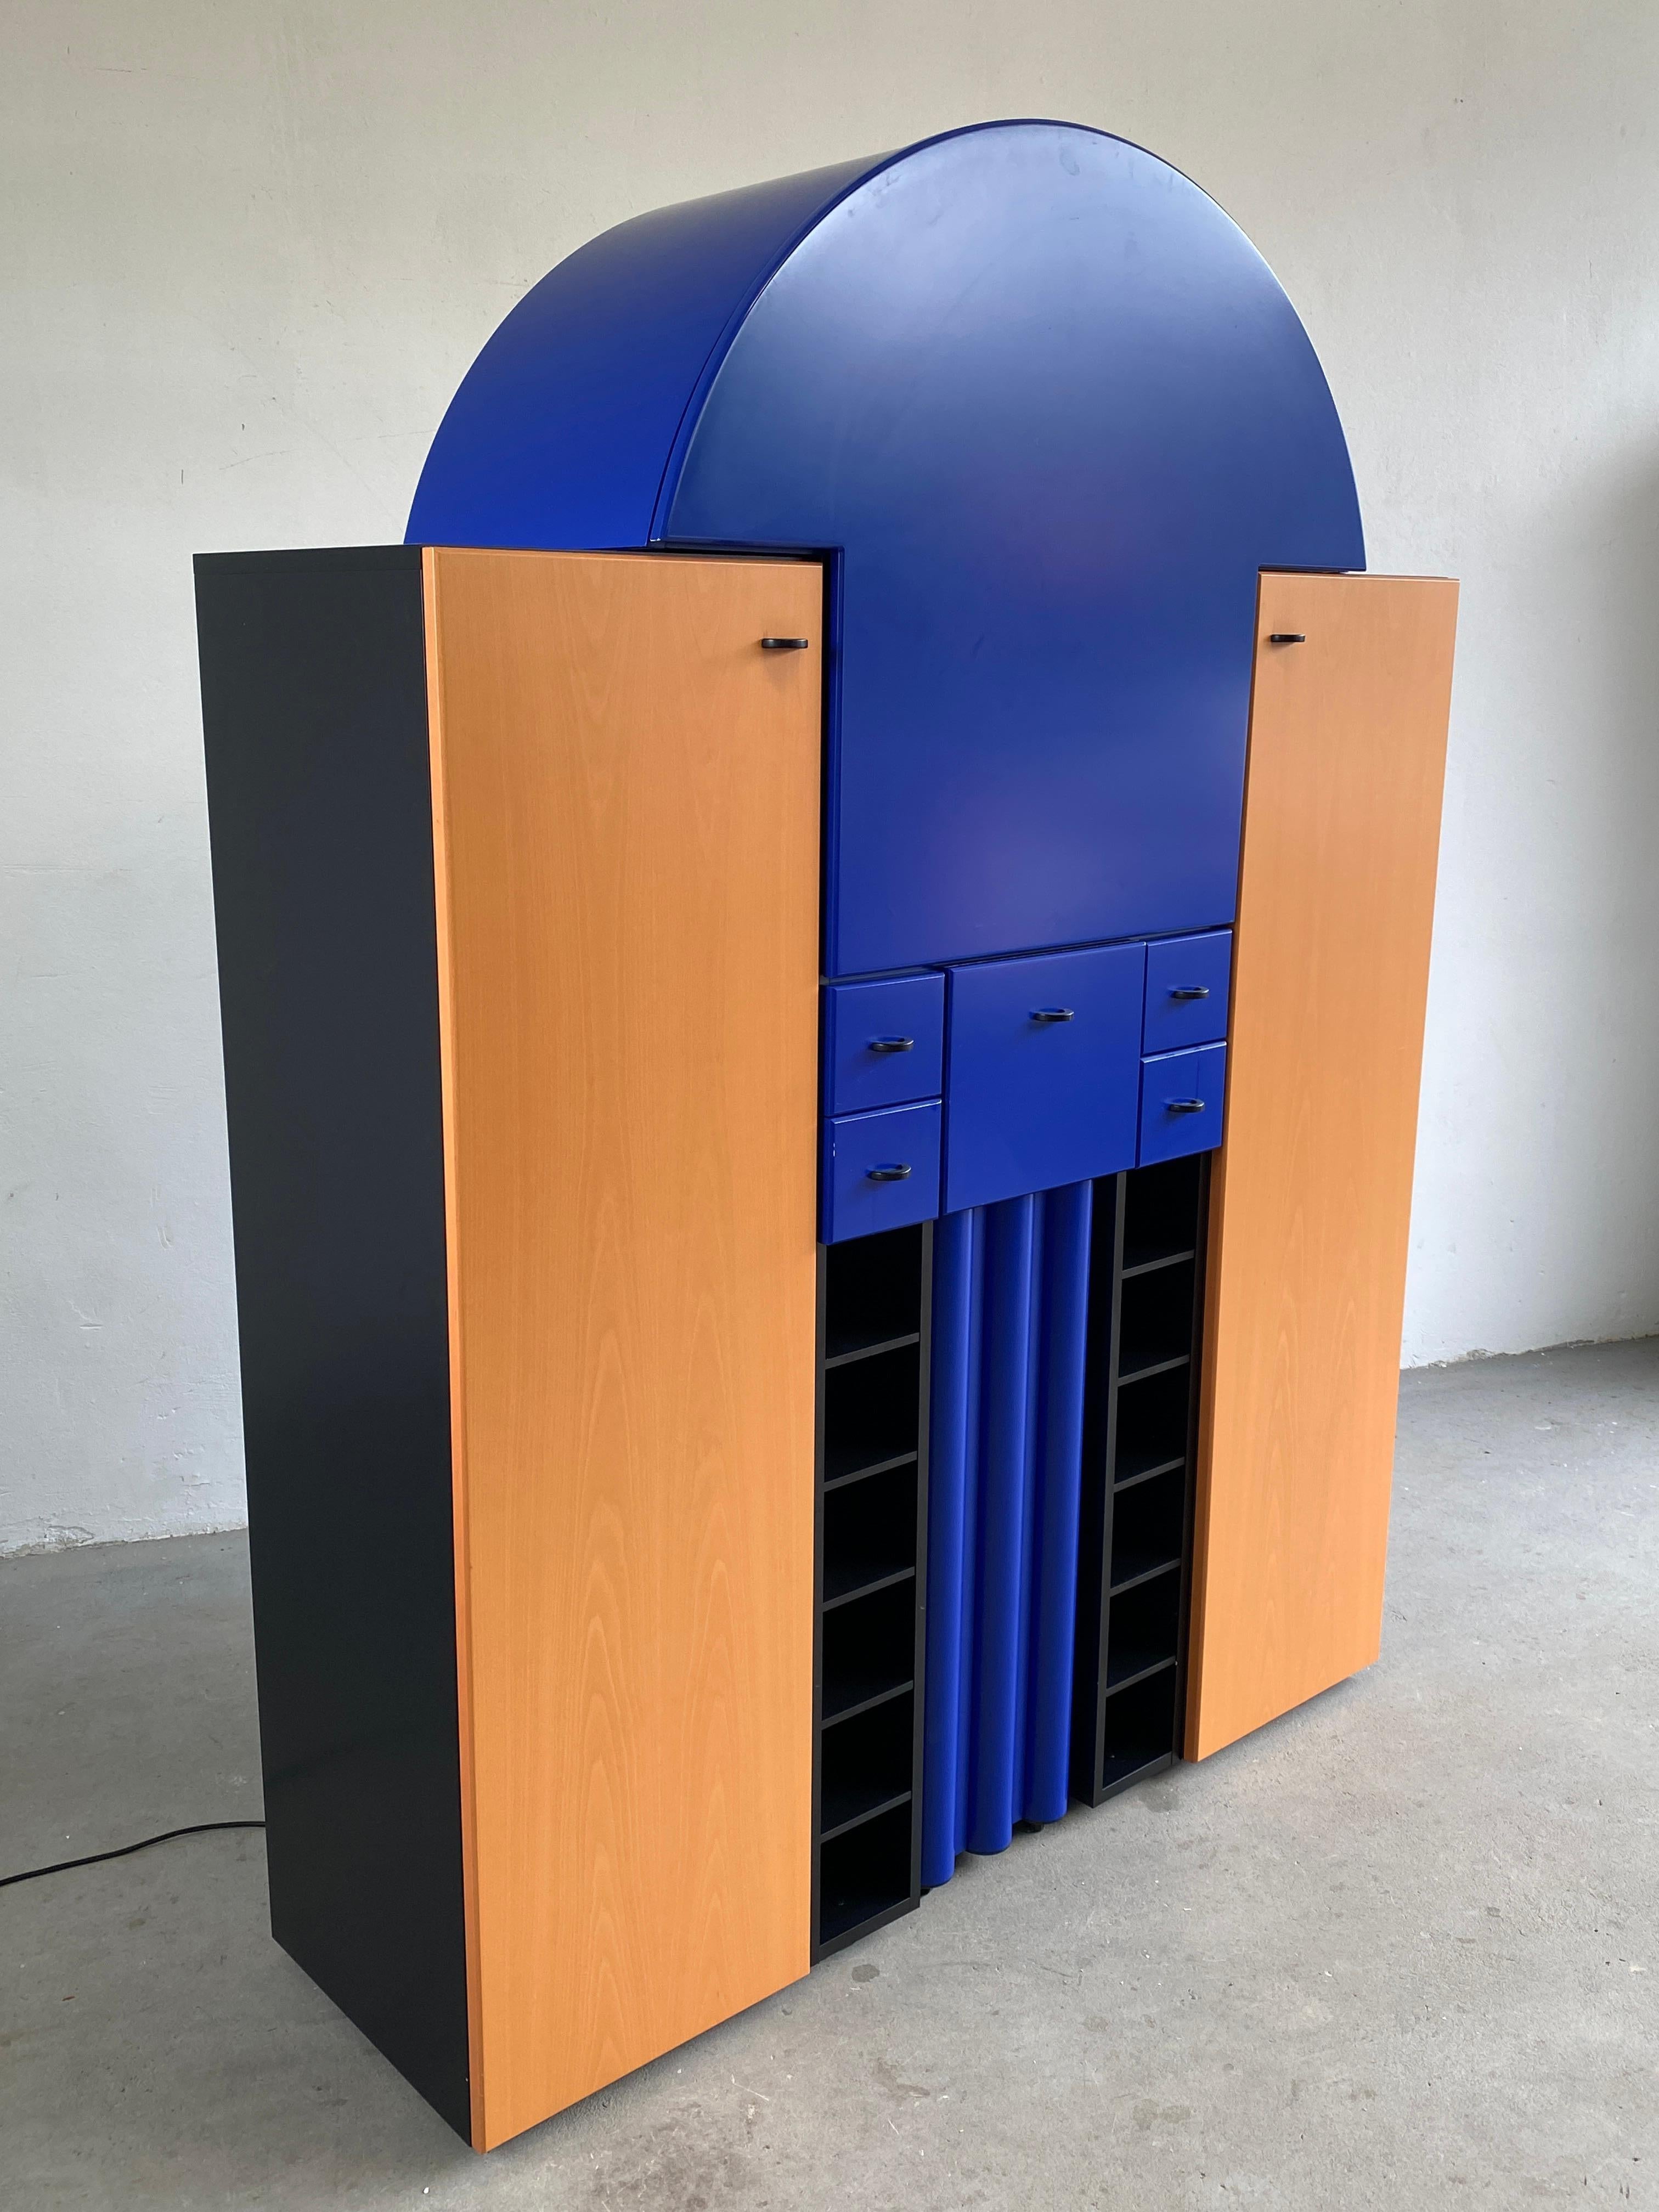 Metal Postmodern Bar Cabinet 'Duo-Bar' by Peter Maly for Interlübke, 1980s Germany 